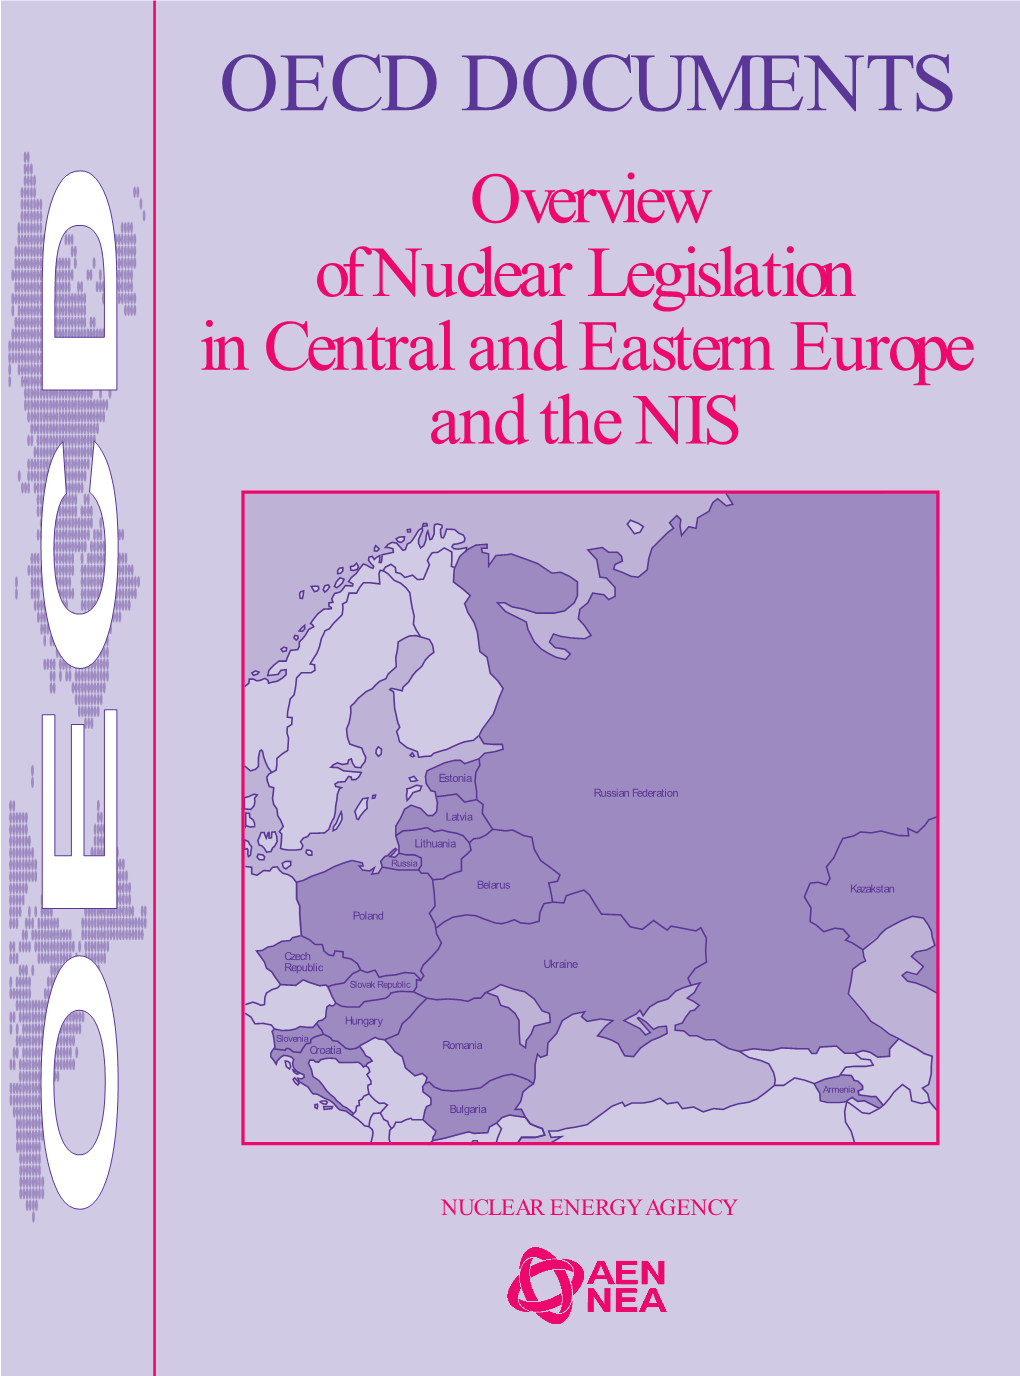 Overview of Nuclear Legislation in Central and Eastern Europe and the NIS